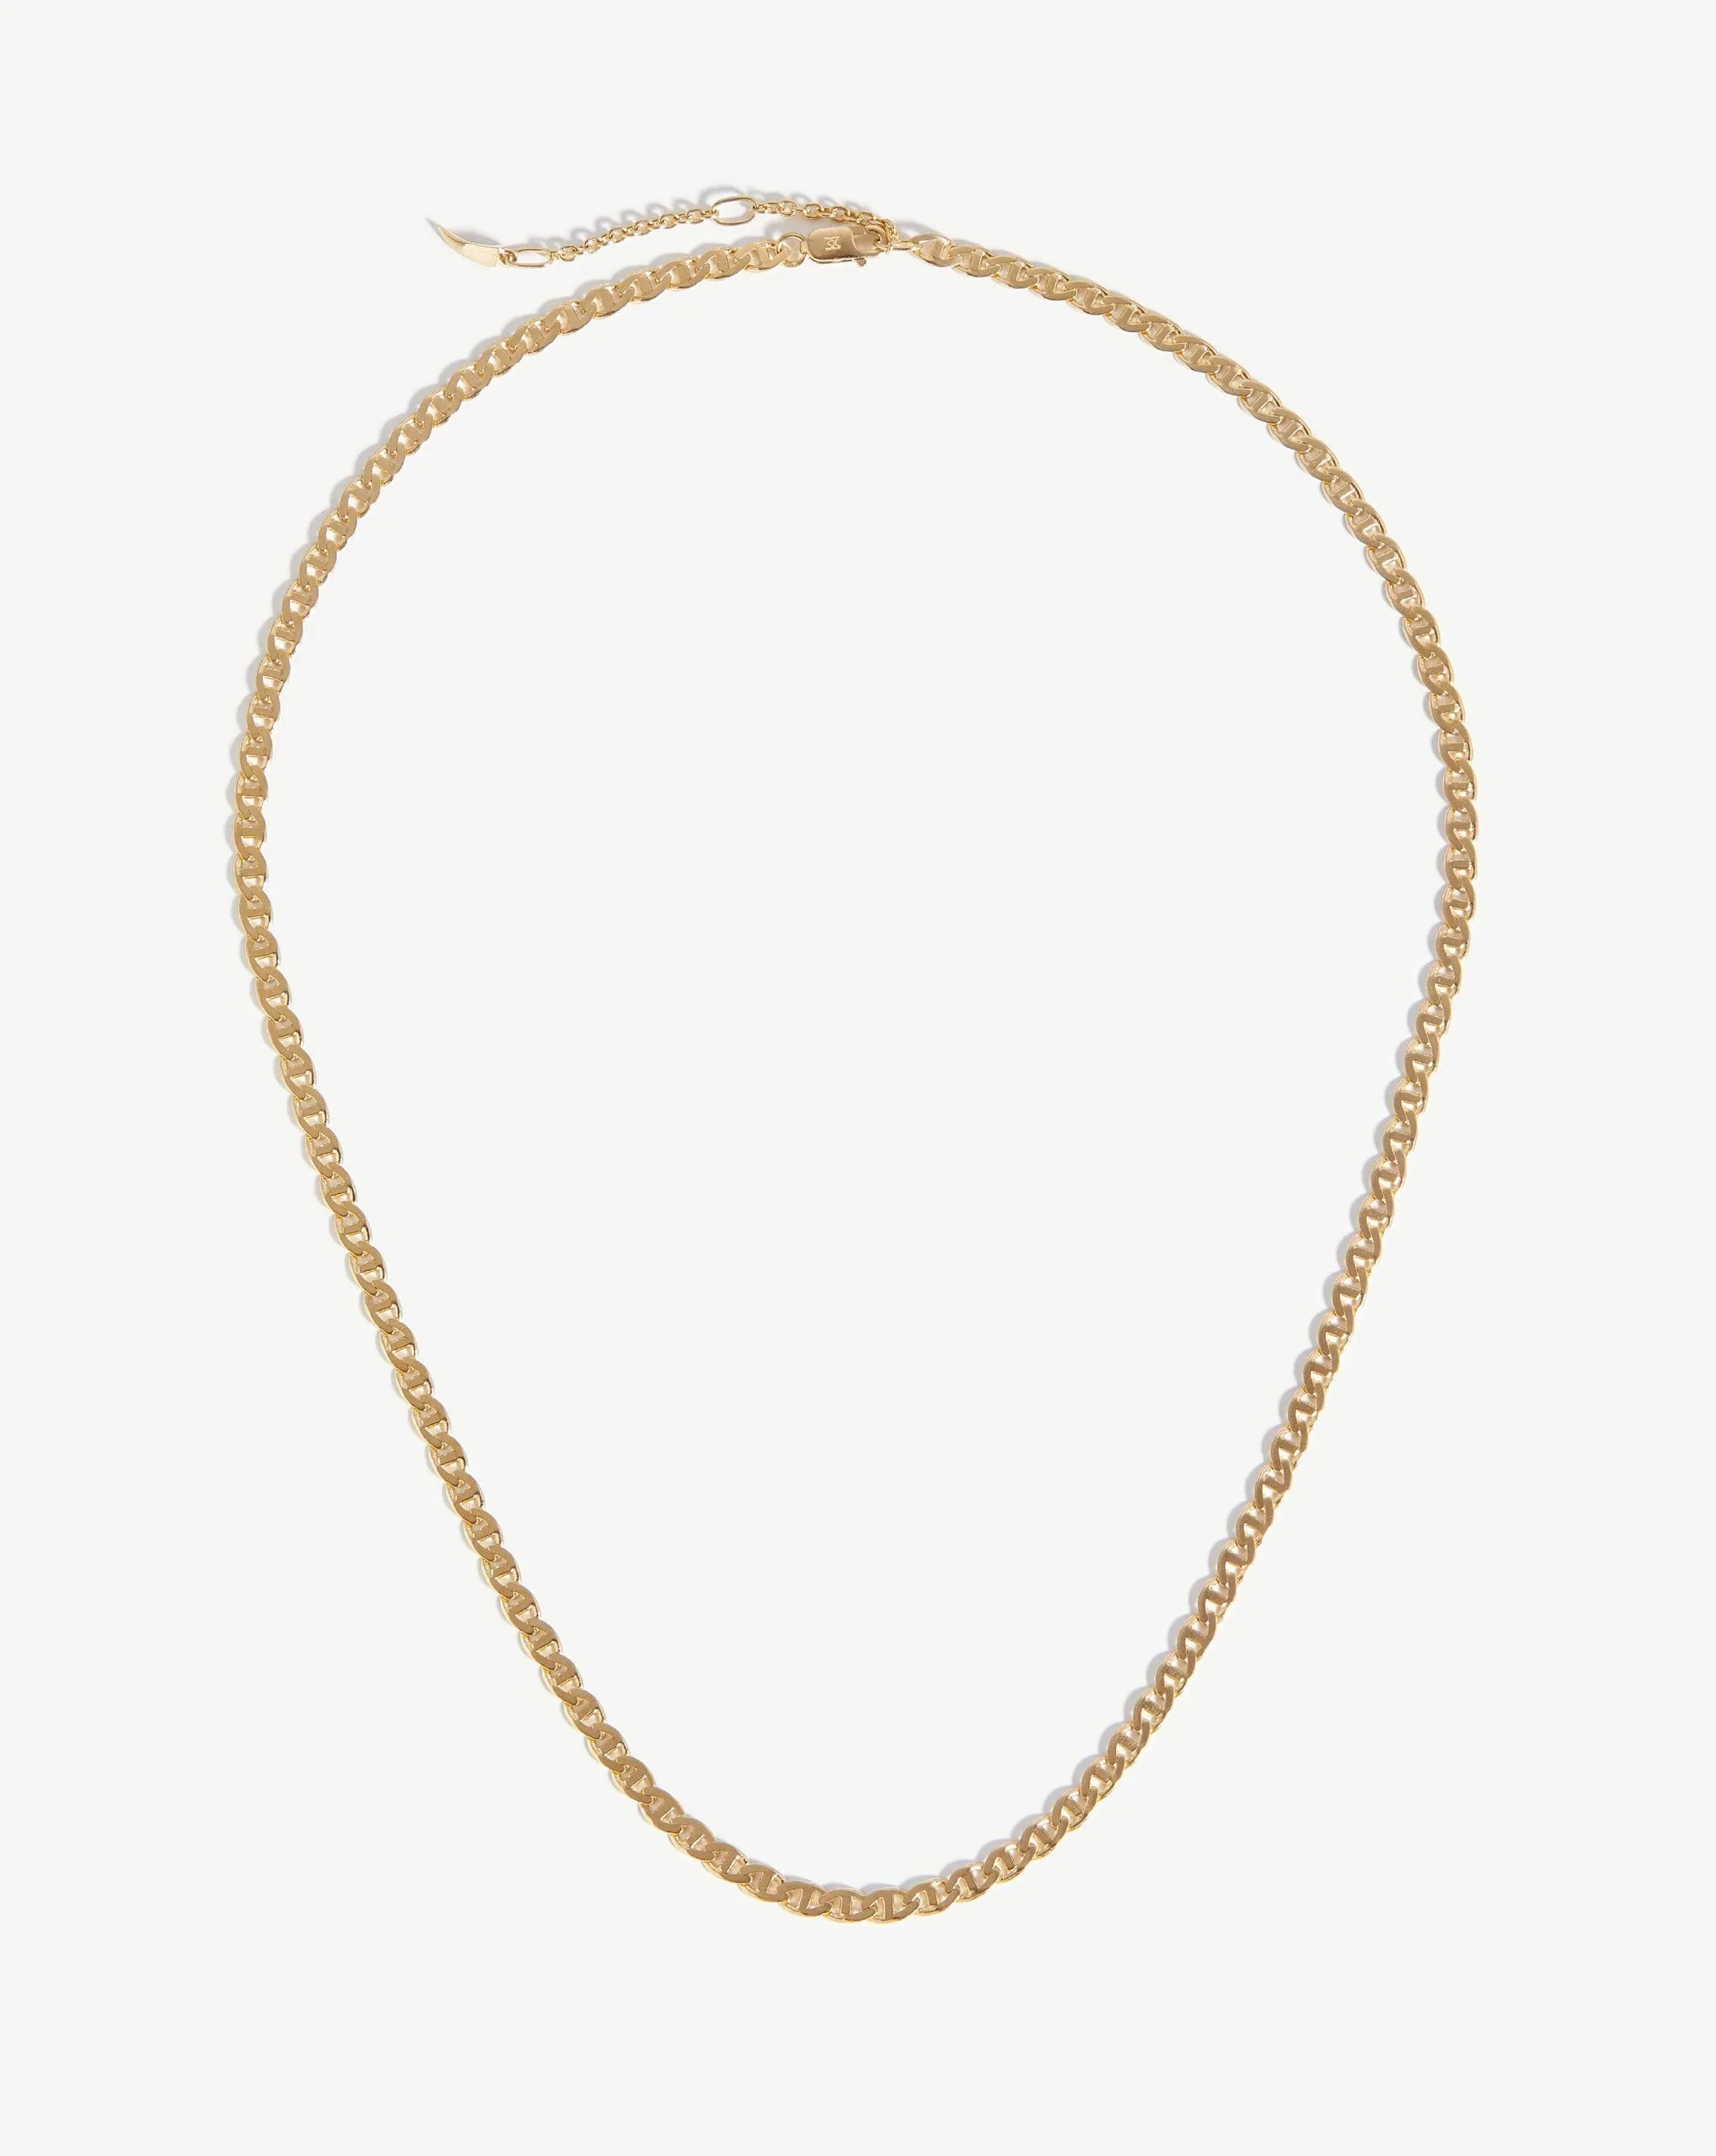 Fine Classic Rope Chain Necklace